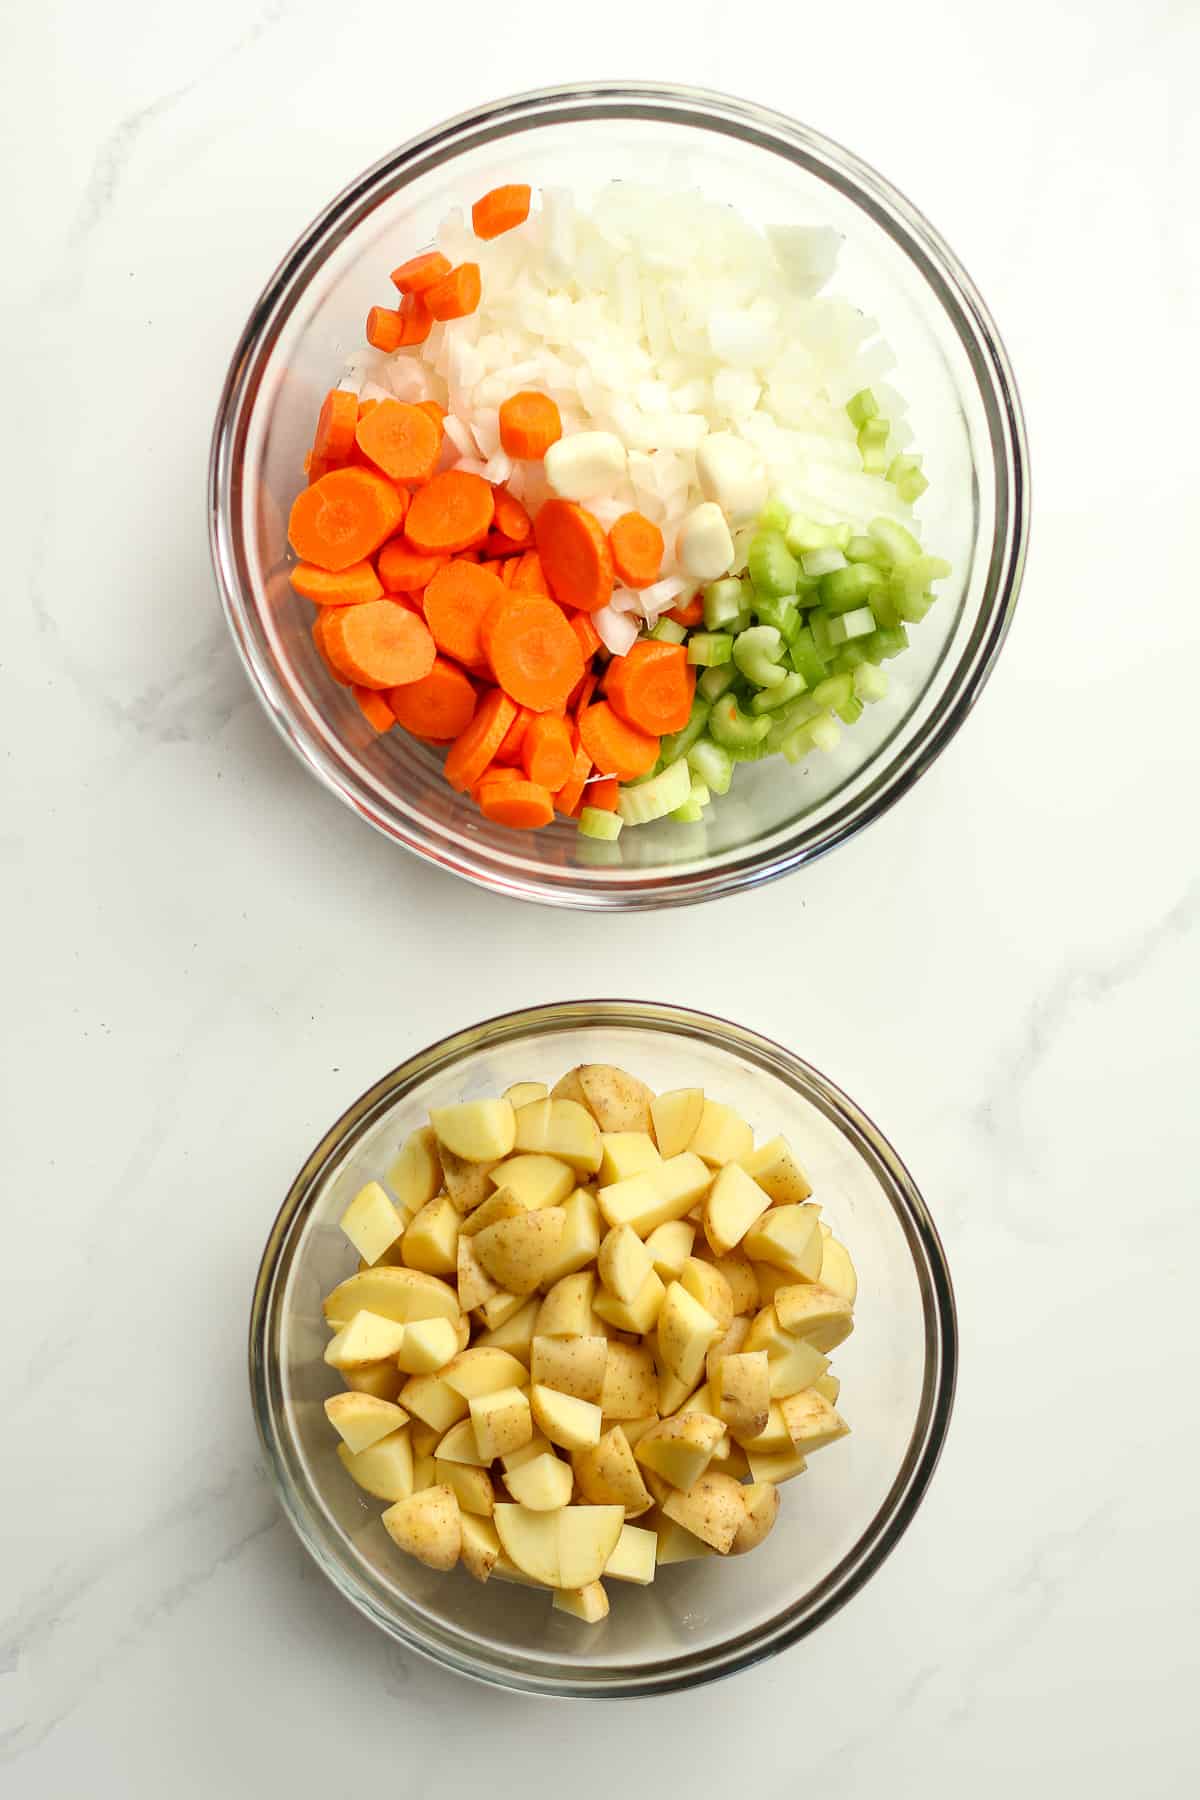 Two bowls of the chopped veggies.